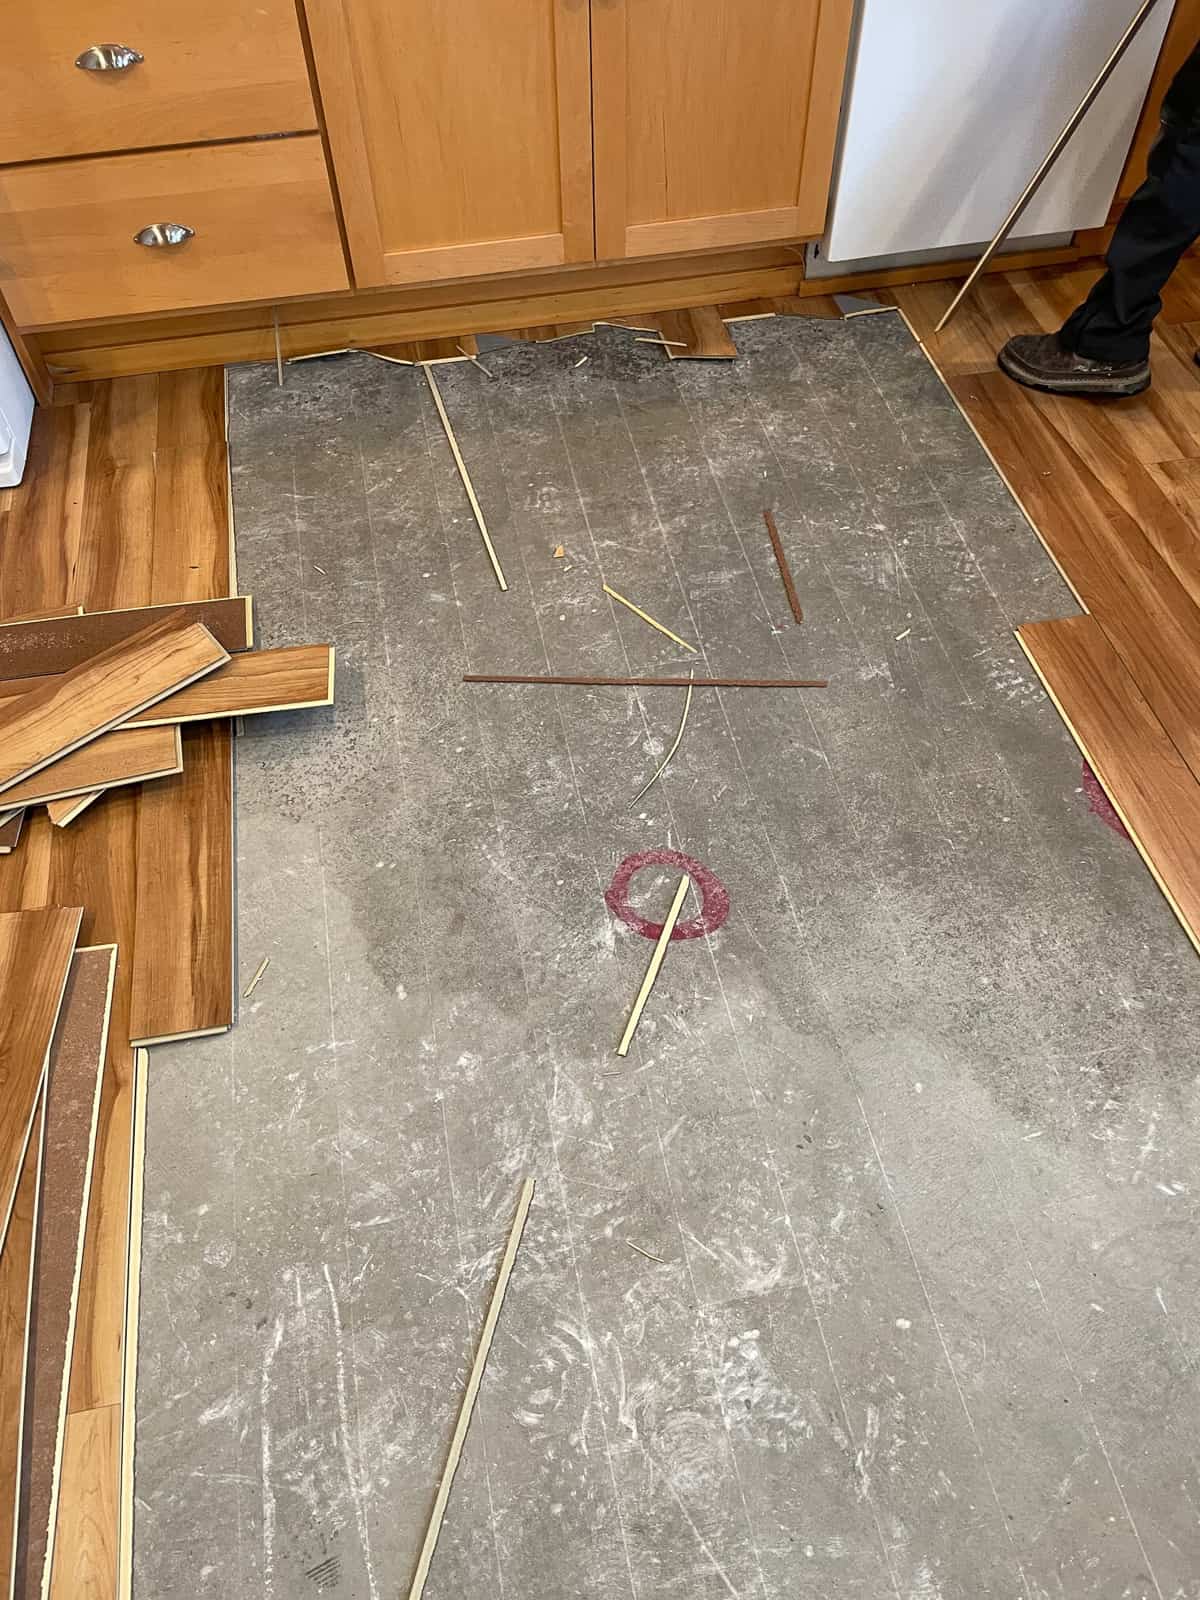 a floor with water damage.